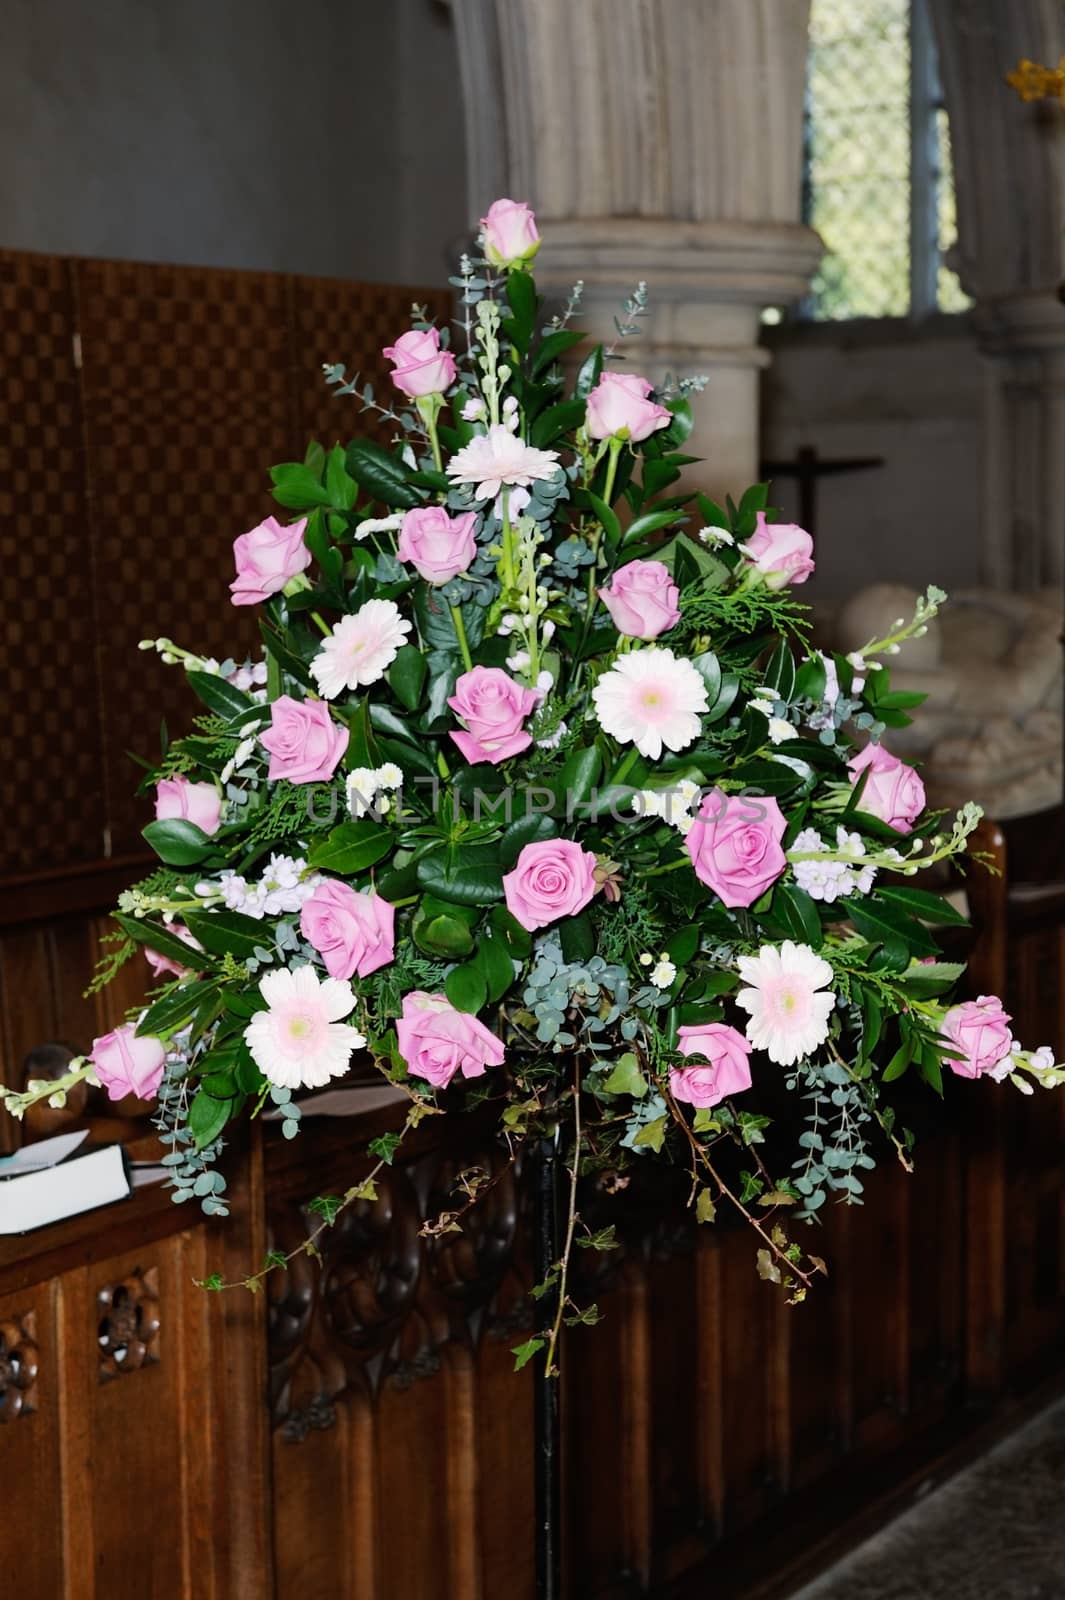 Wedding day flowers in church by kmwphotography